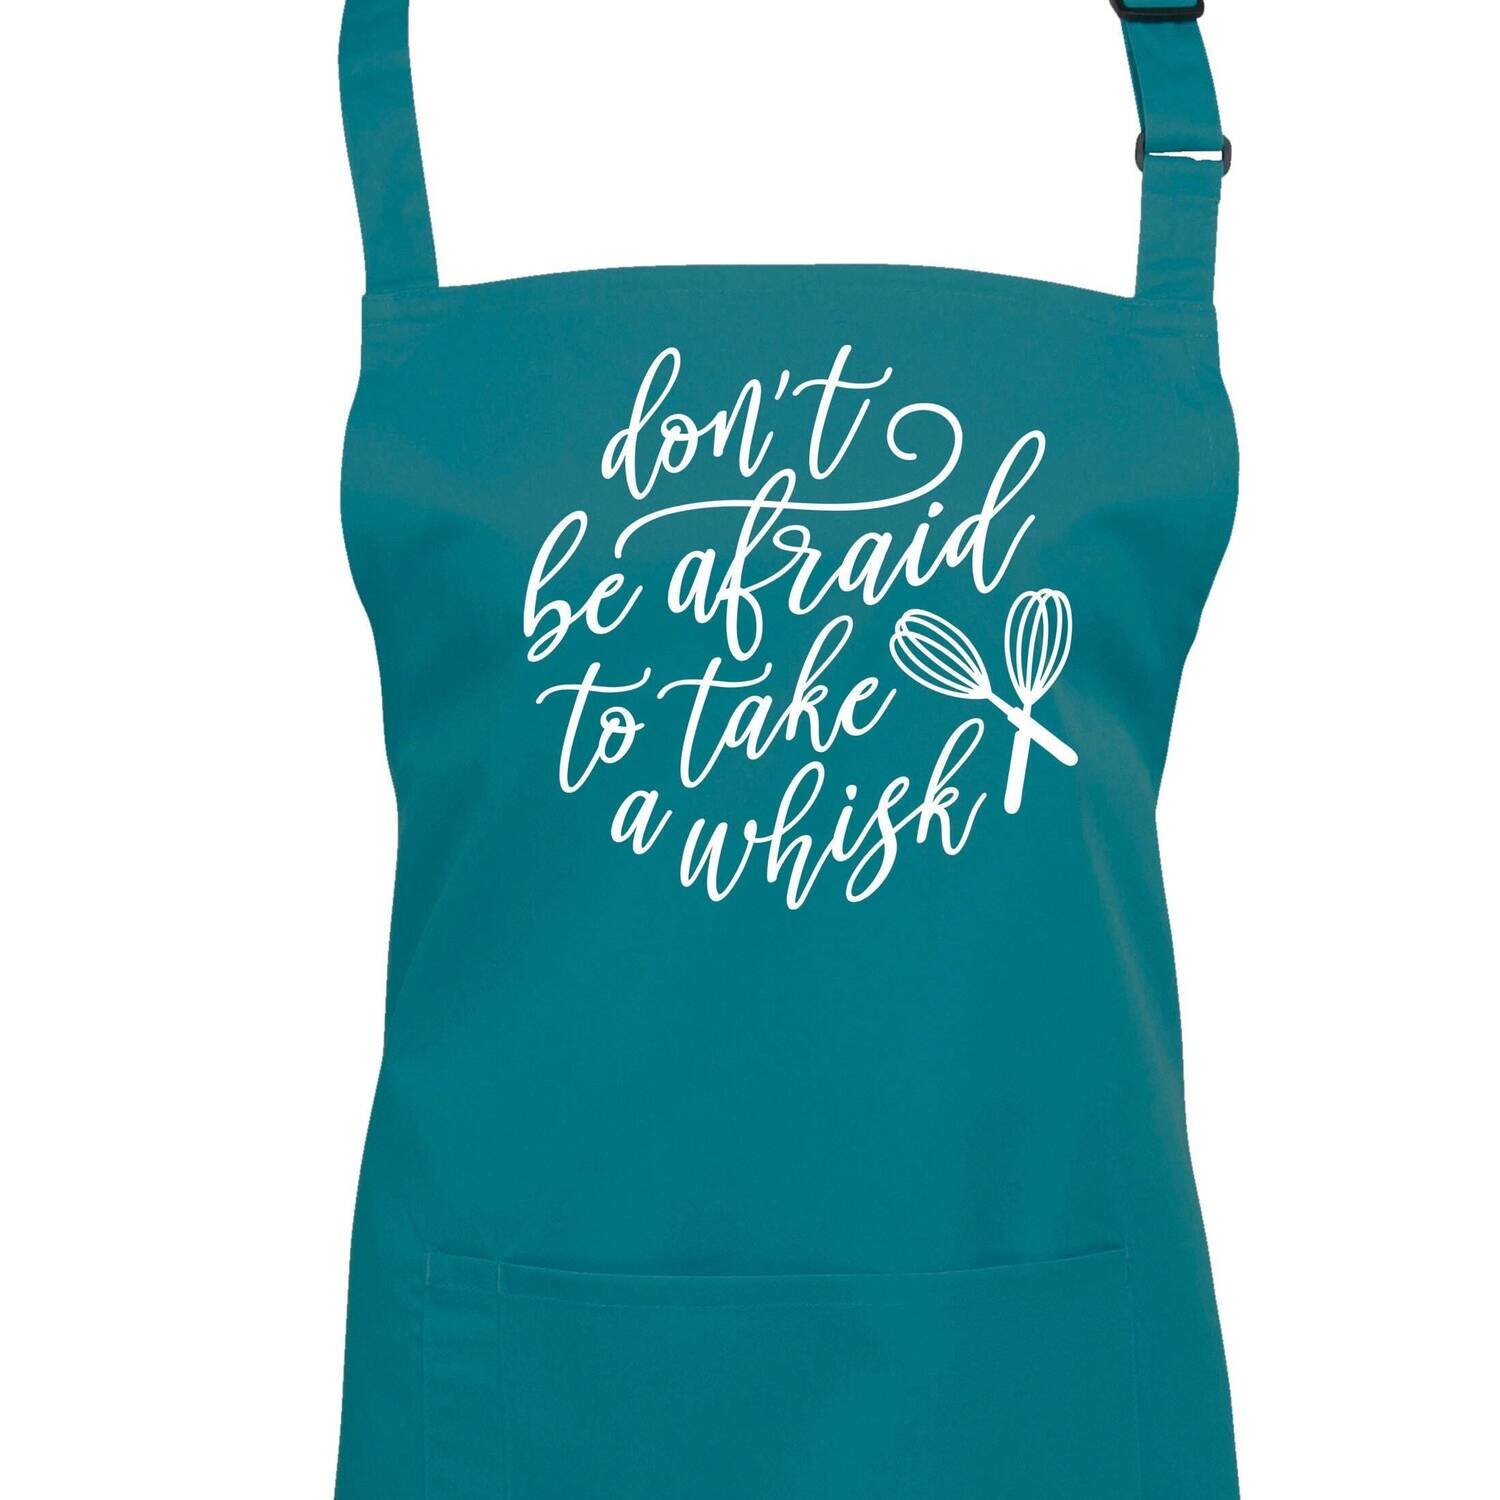 Don't Be Afraid To Take a Whisk! Fun Quote Apron.